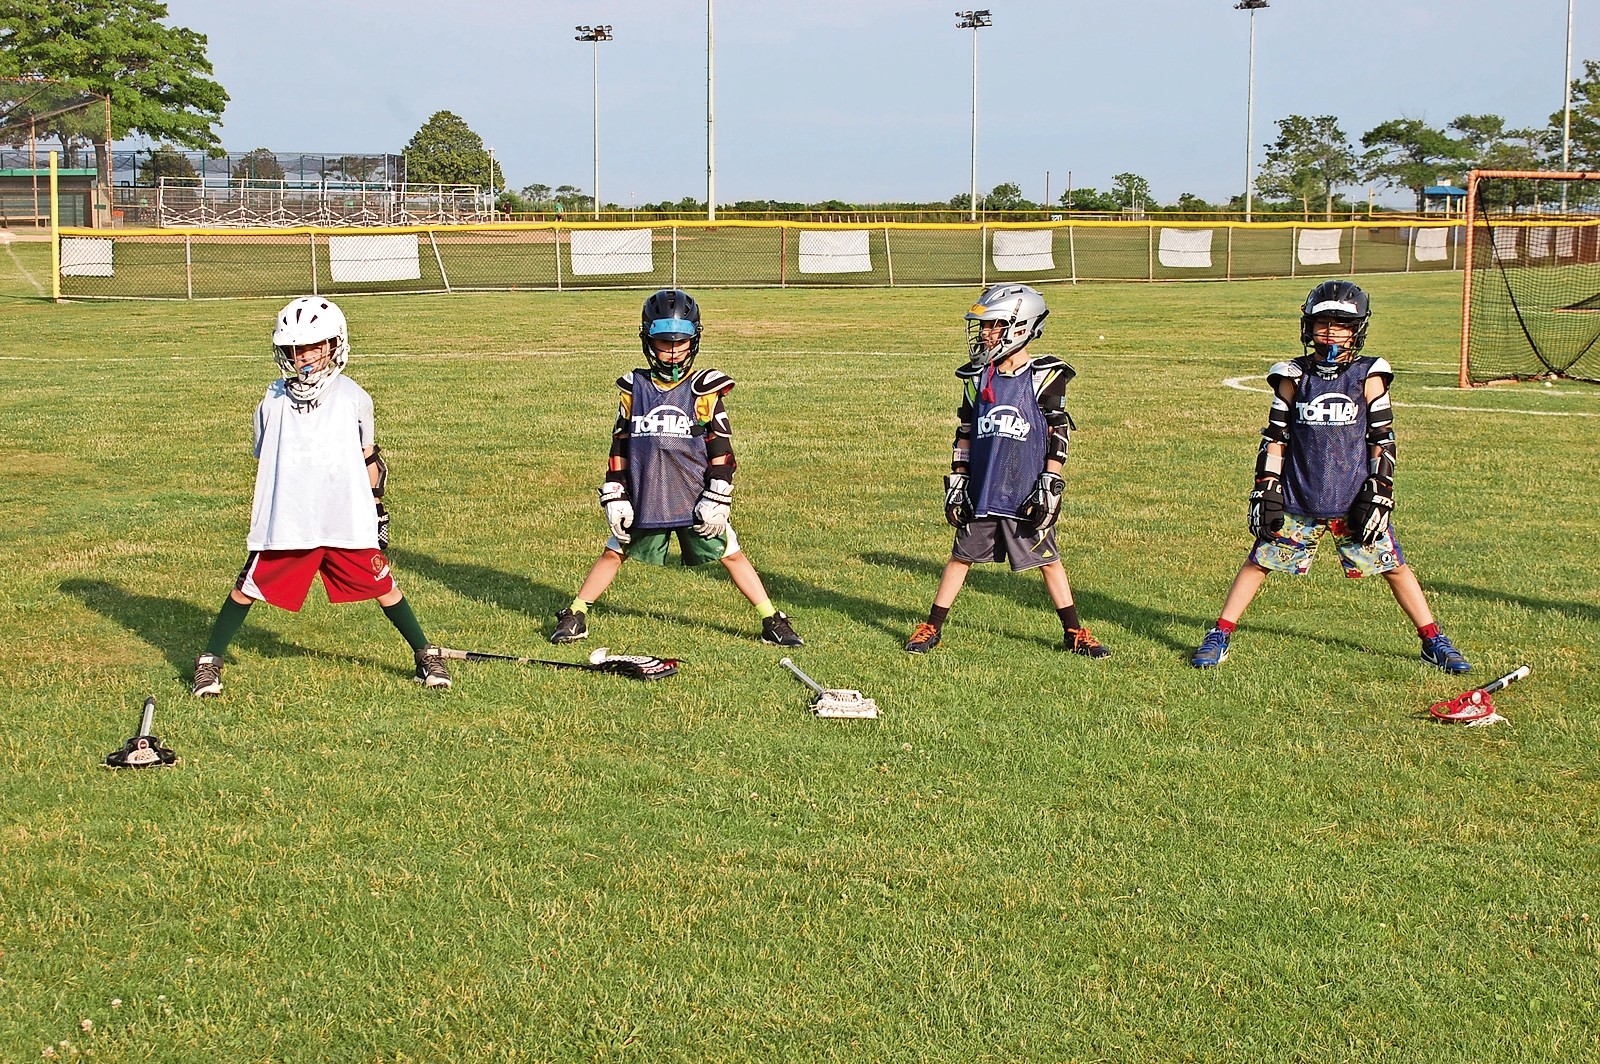 Children took part in the Town of Hempstead’s Lacrosse Academy at Seaman’s Neck Park last week, the first session of the summer.